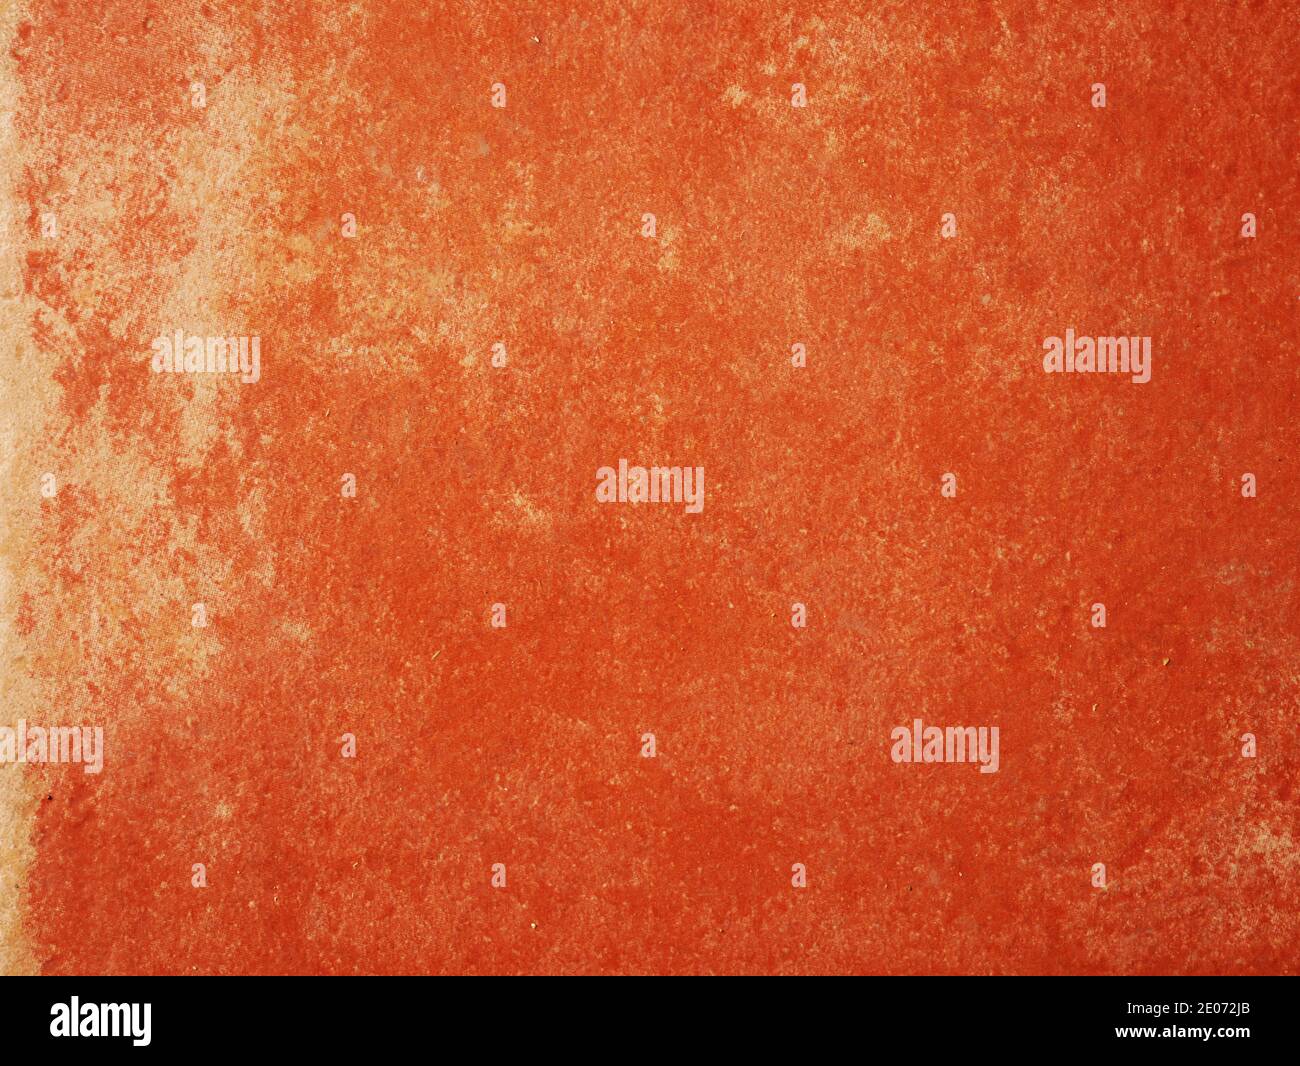 Background of a worn and rusted iron surface Stock Photo